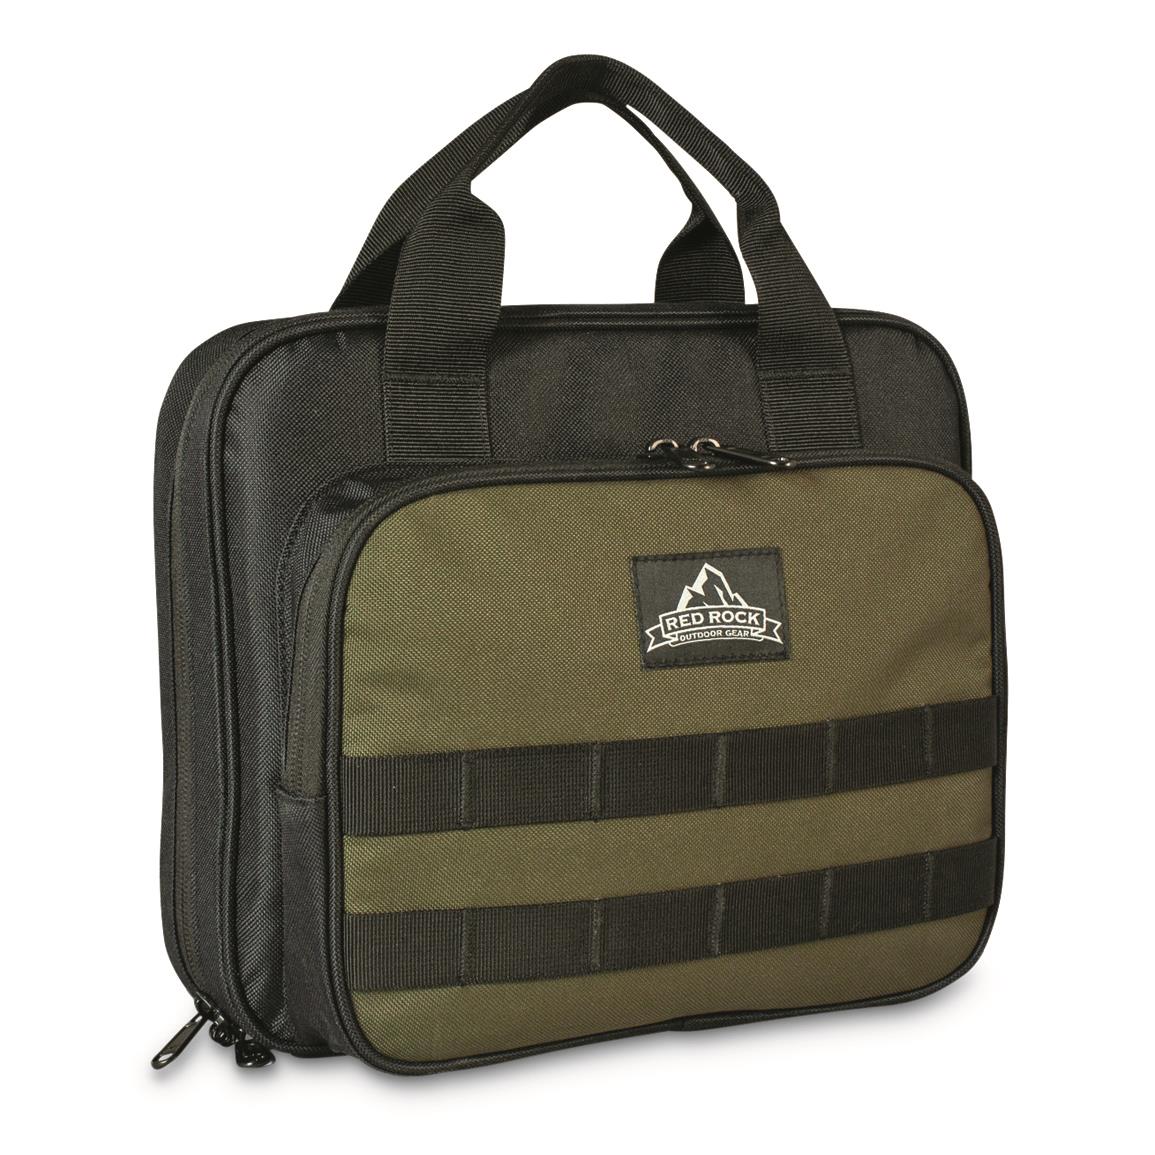 MOLLE panels for adding compatible tactical gear, Black/od